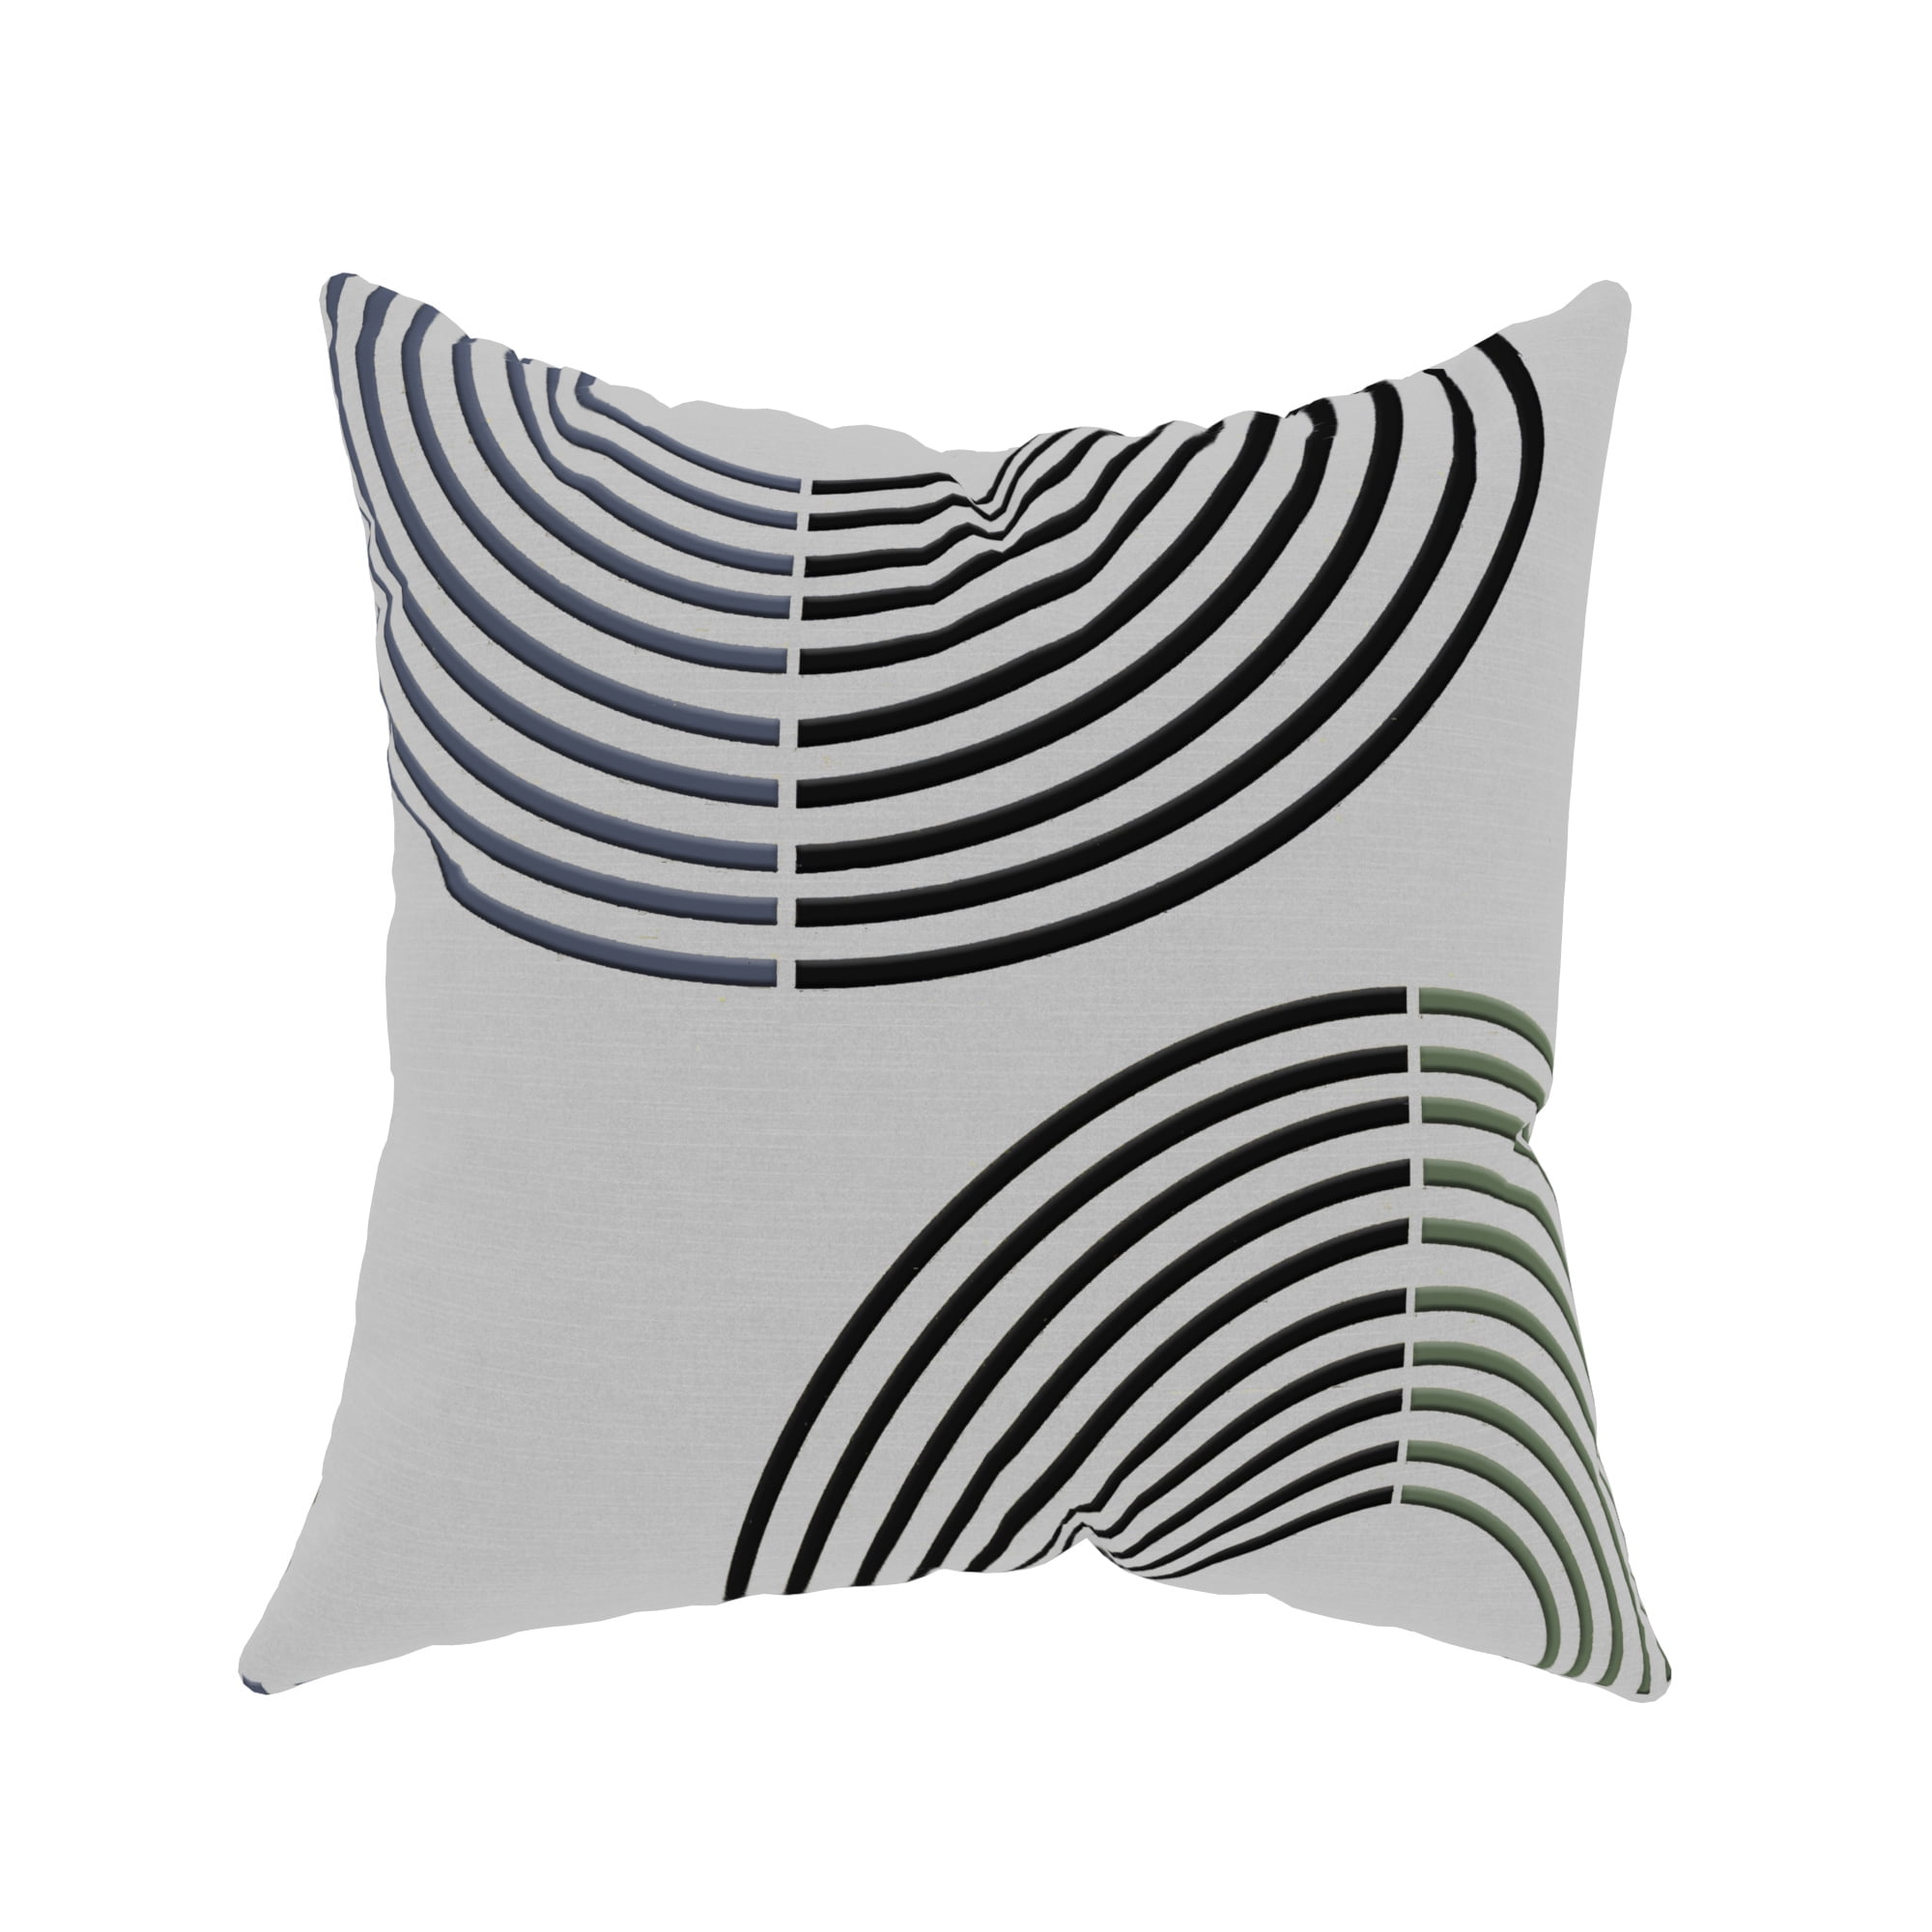 18" Family Geometric Soft Fabric Pillow Case Sofa Cushion Cover Home Decor Gifts 